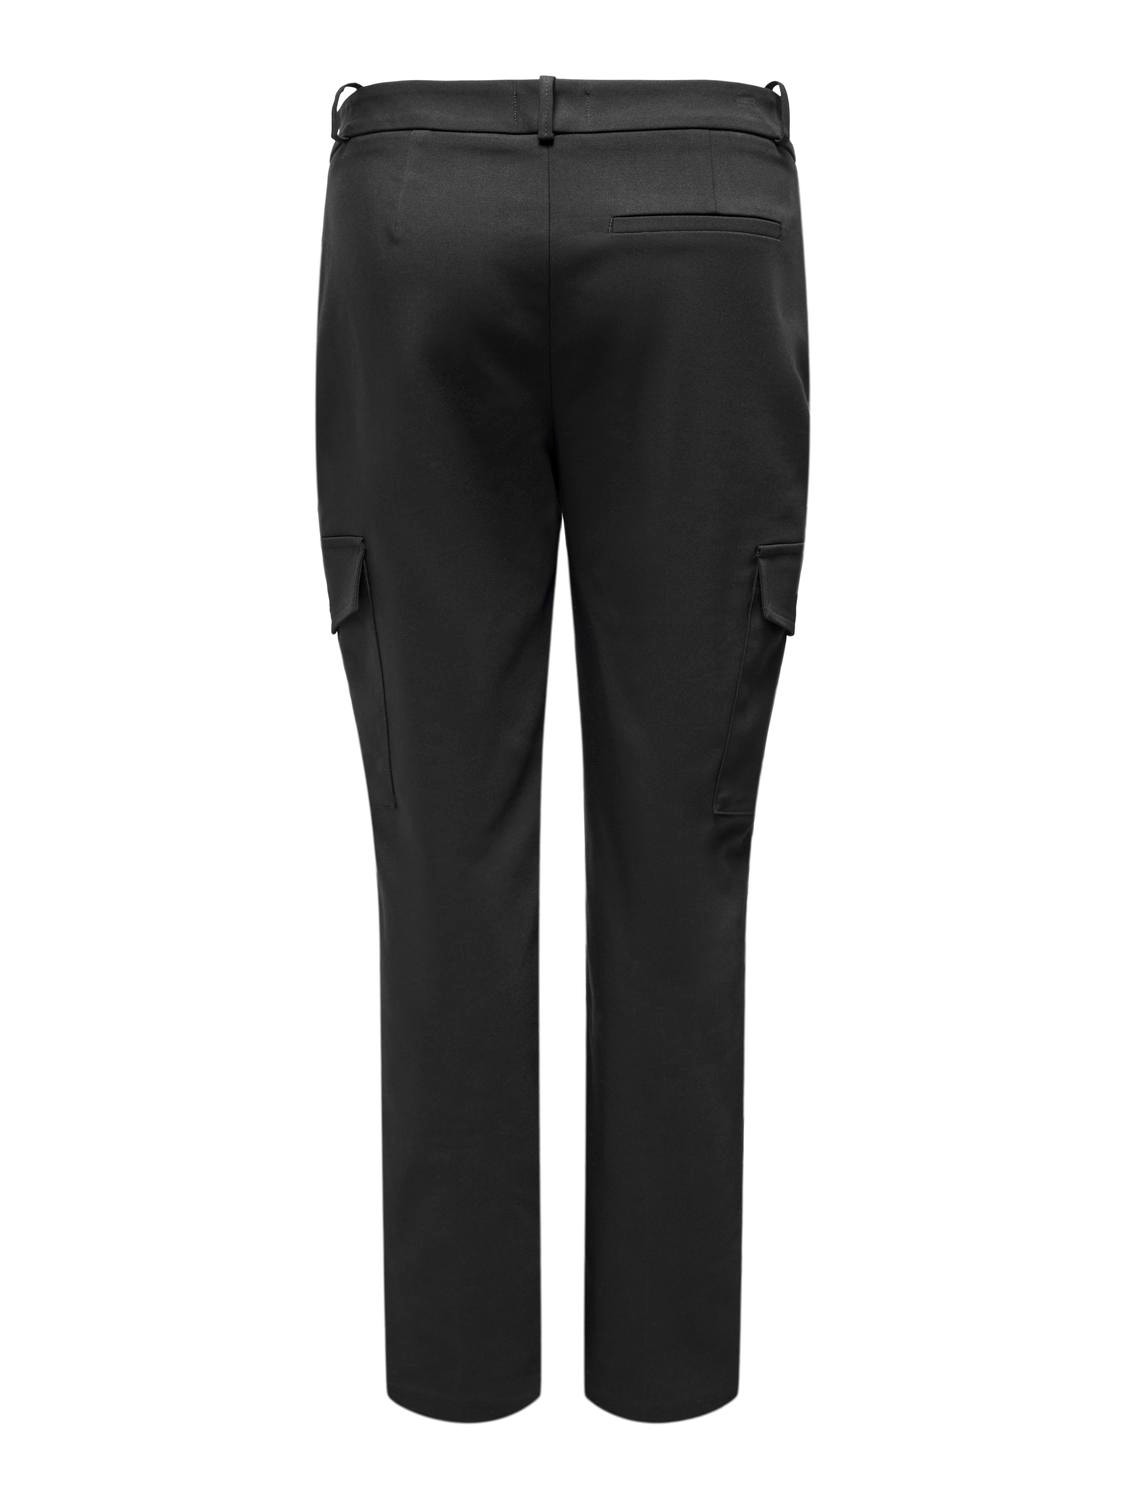 ONLY Basic cargo trousers -Black - 15281145